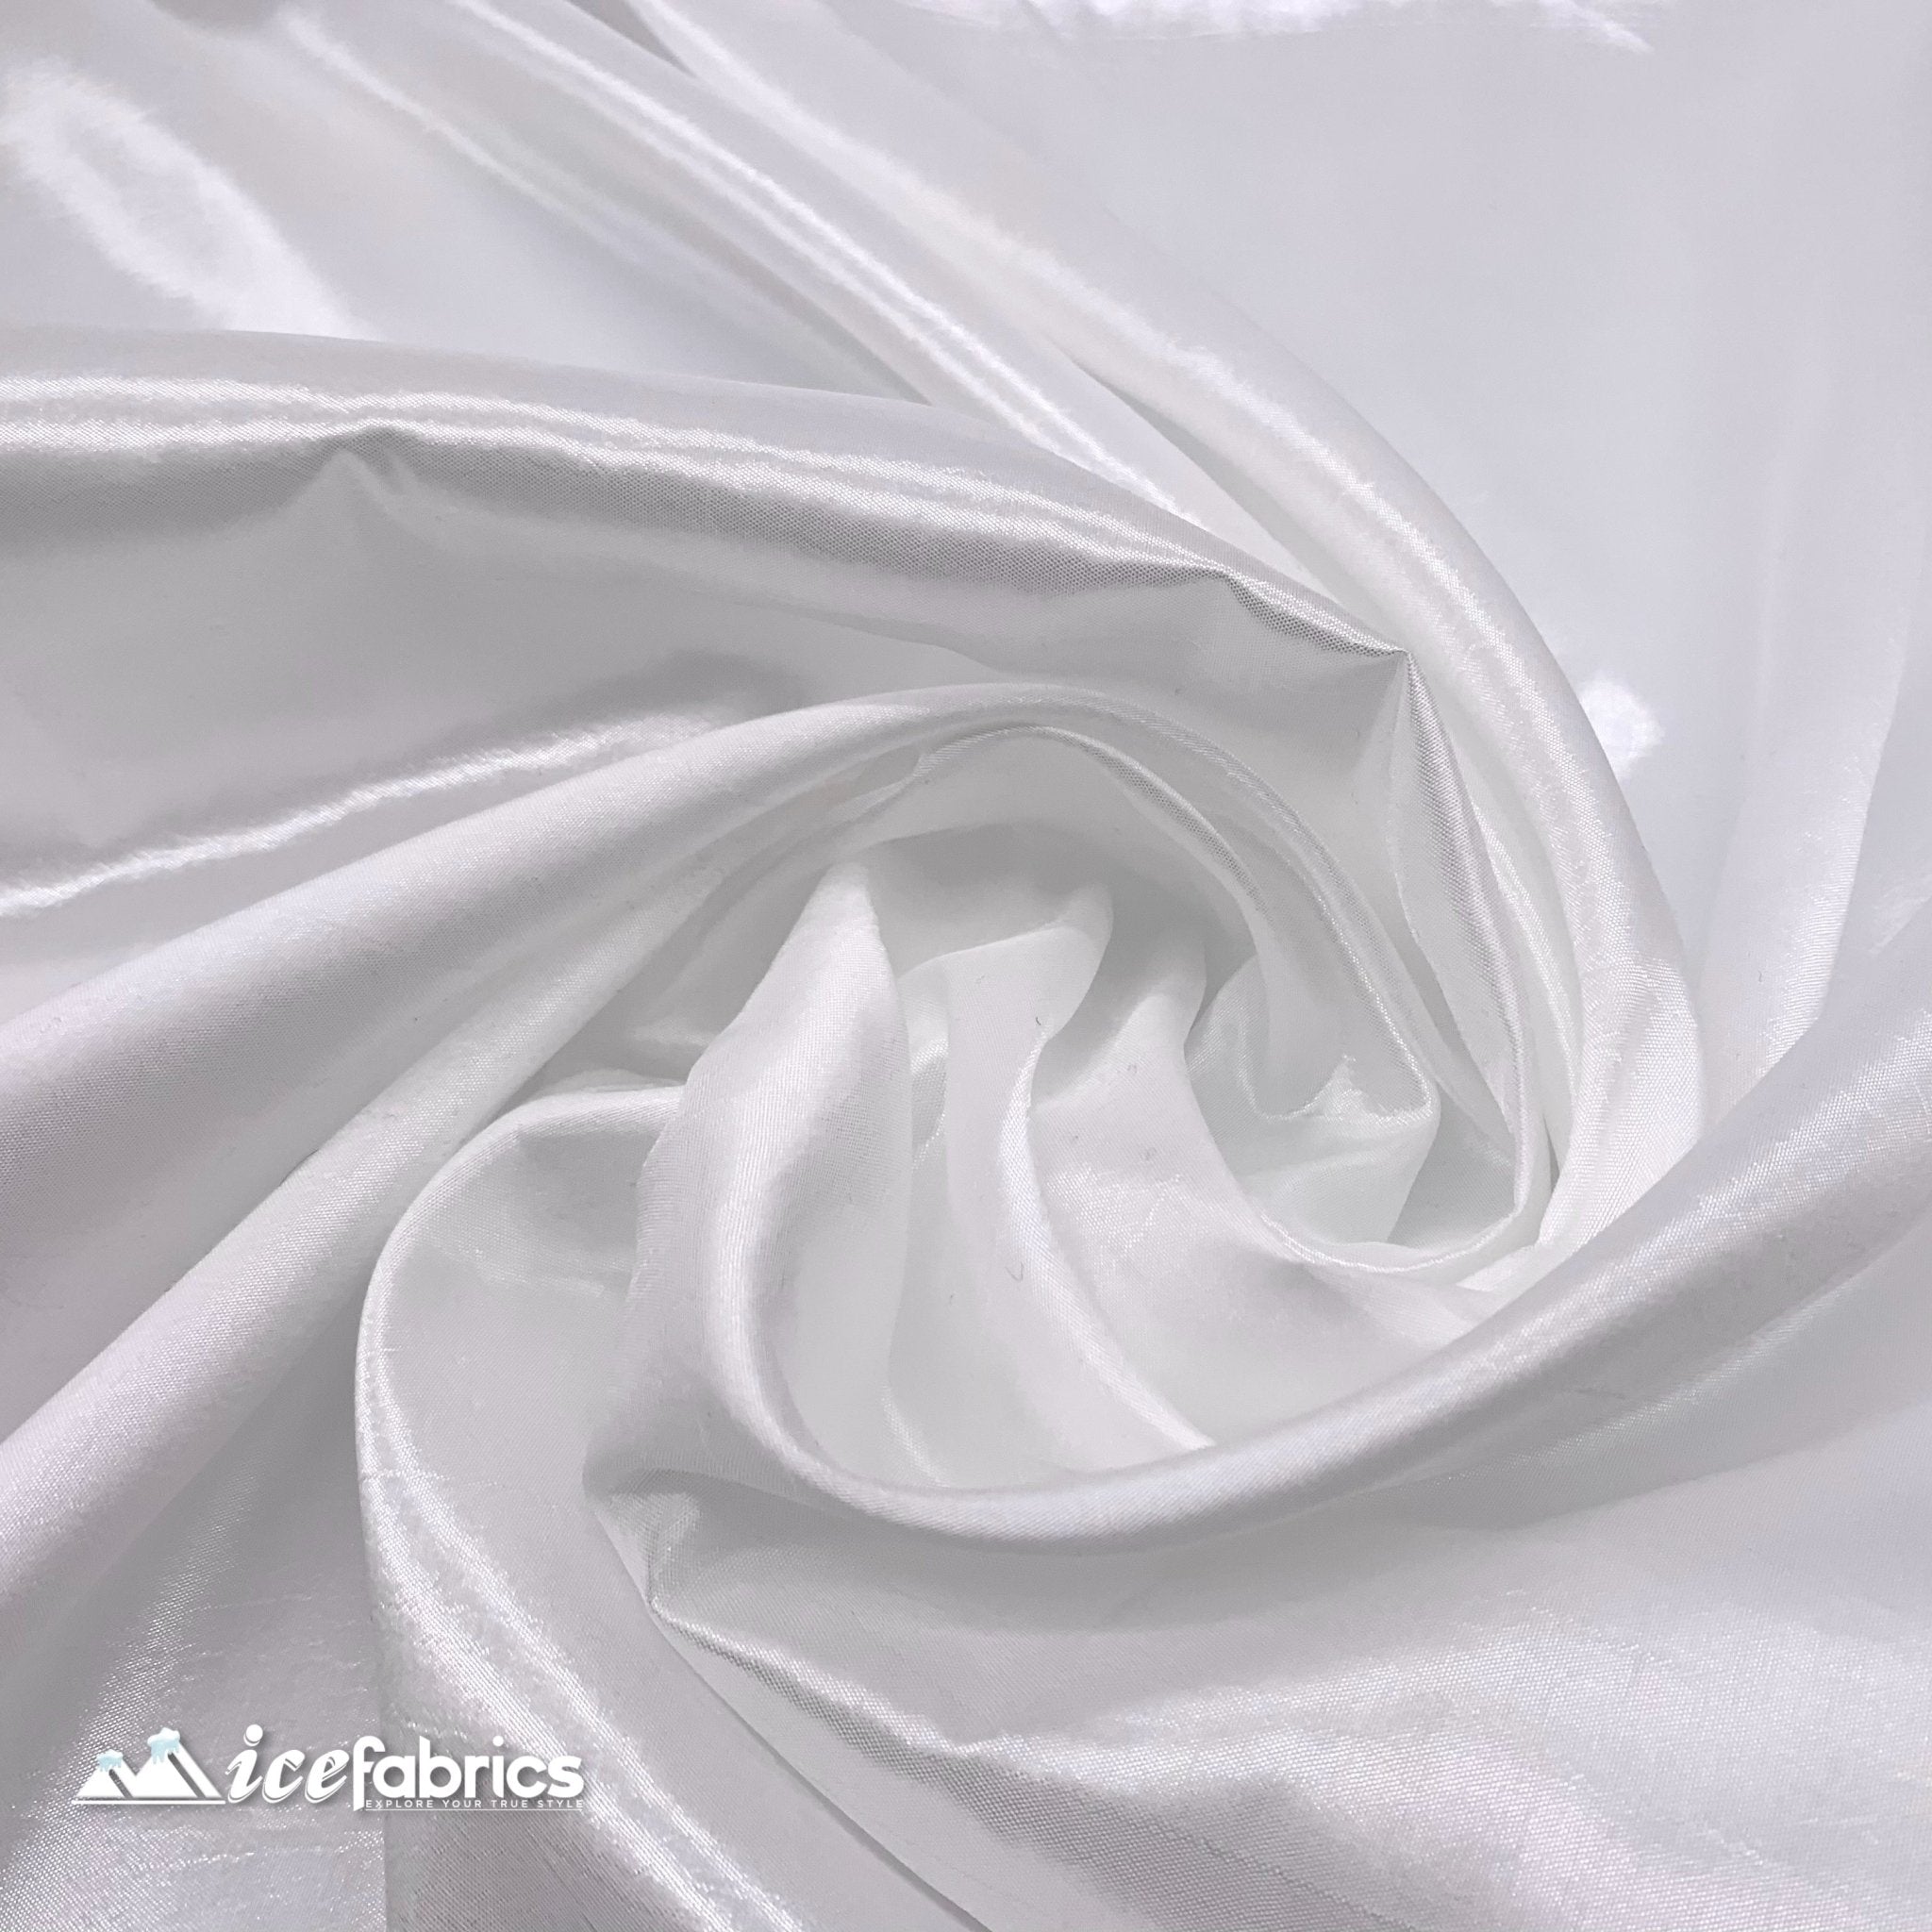 High Quality Solid Taffeta Fabric_ 60" Width_ By The YardTaffeta FabricICEFABRICICE FABRICSNavy blueHigh Quality Solid Taffeta Fabric_ 60" Width_ By The YardTaffeta FabricICEFABRICICE FABRICSWhiteHigh Quality Solid Taffeta Fabric_ 60" Width_ By The Yard ICEFABRIC White